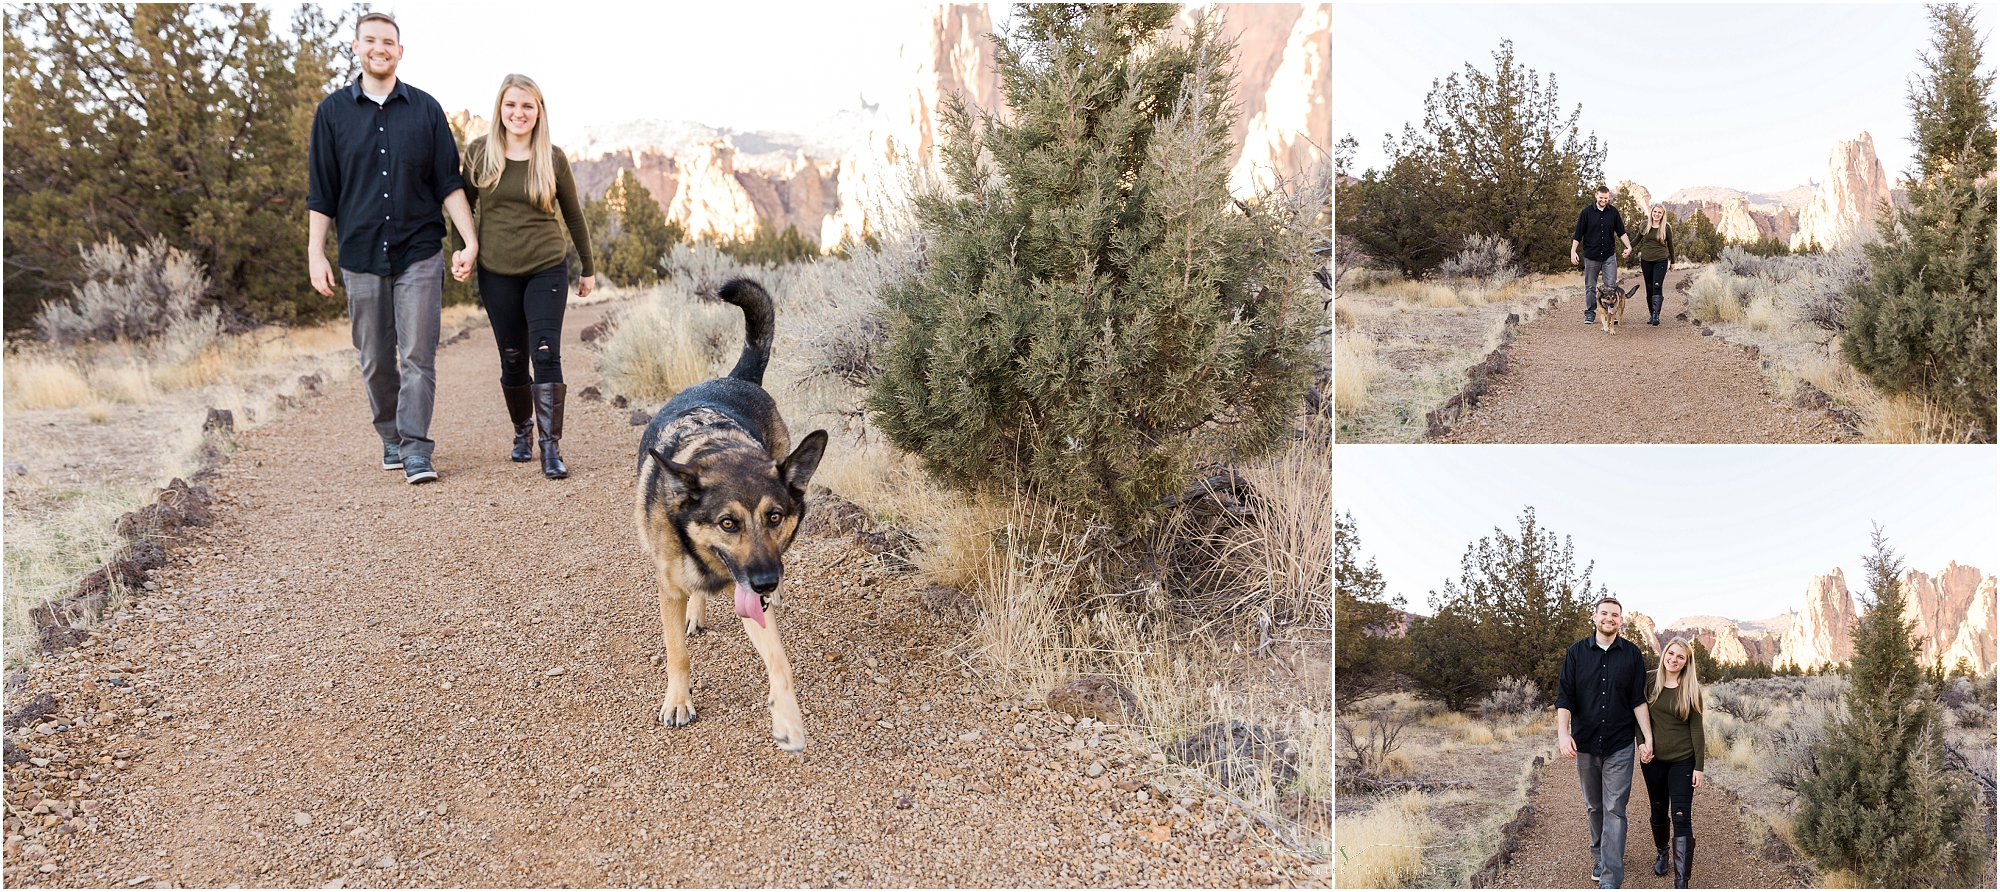 Dog in the engagement photos at Smith Rock State Park in Oregon. | Erica Swantek Photography